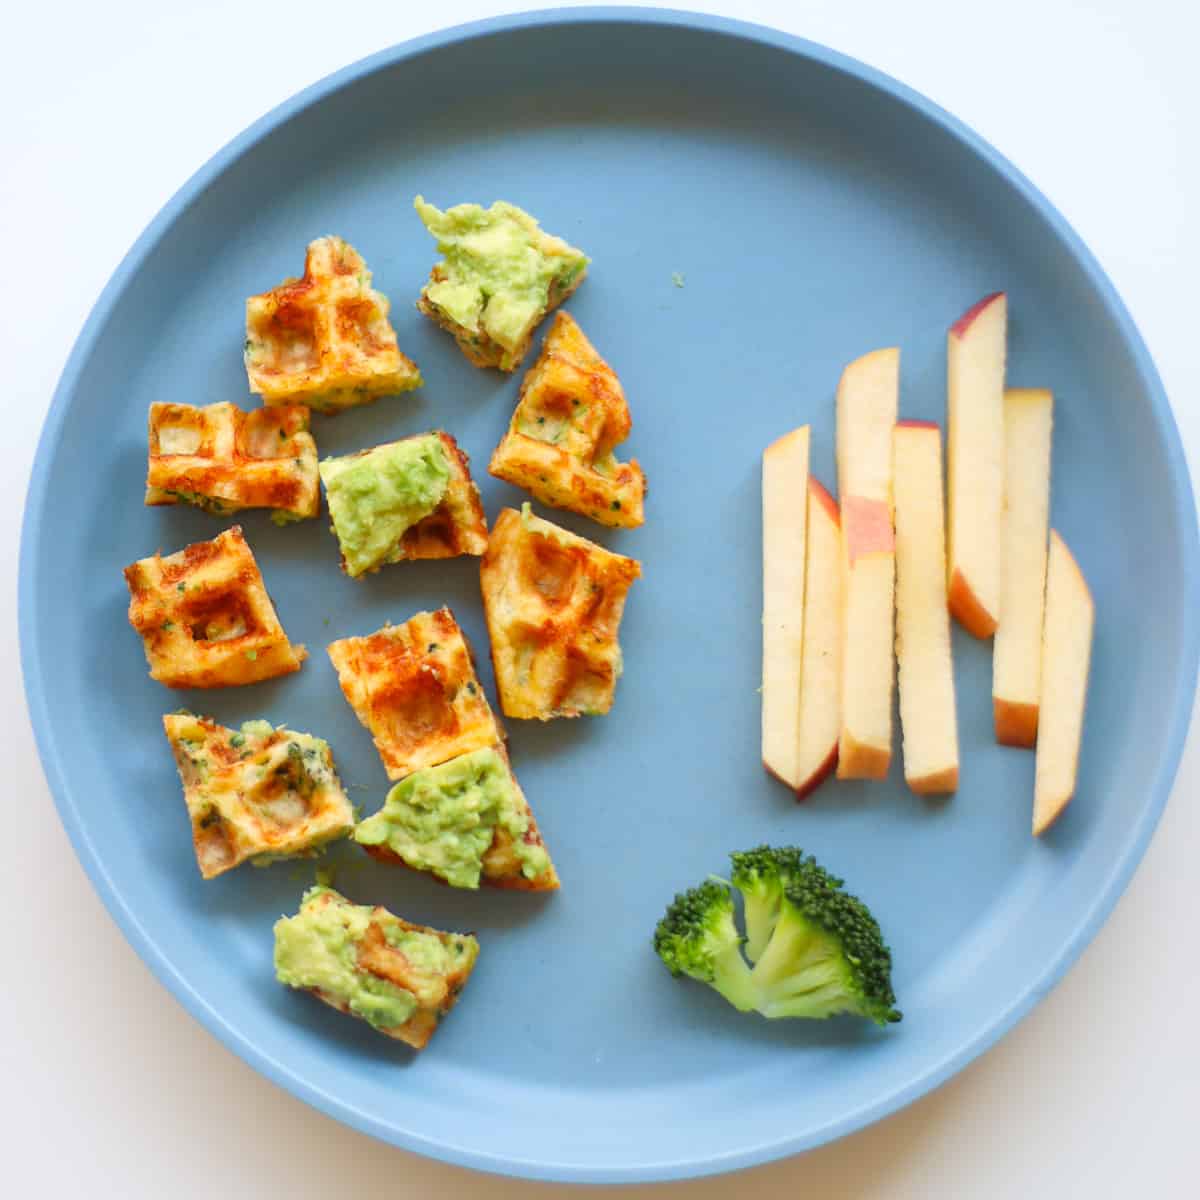 A blue plate with a waffle cut into pieces served with a piece of broccoli and apple spears.